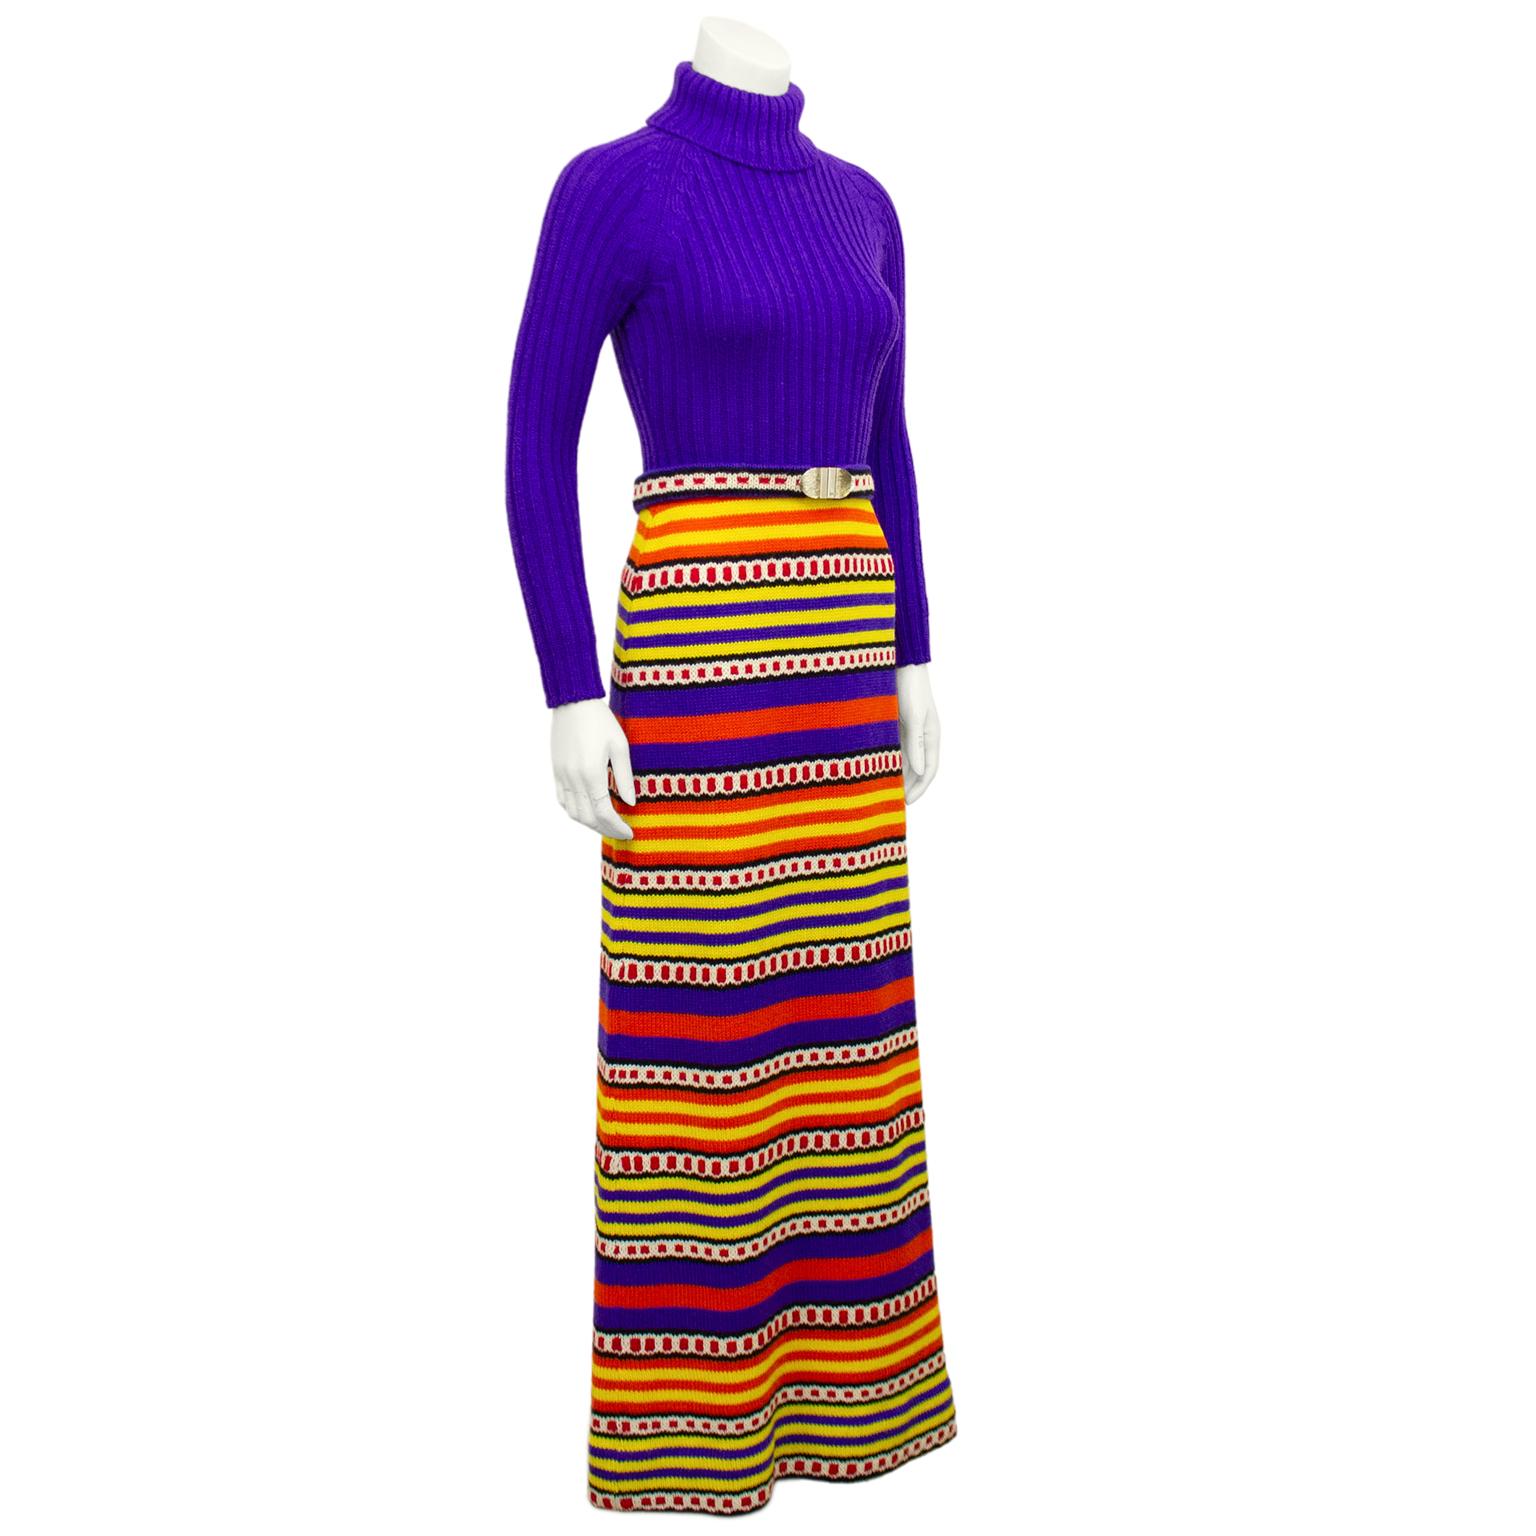 Vibrant and fun poly /wool knit maxi dress from the 1970s. Made in Canada by Marni Knits. Top is ribbed knit purple turtleneck. Bottom is a slight a-line maxi shape with yellow, orange, purple, red, black and white horizontal stripes. Optional